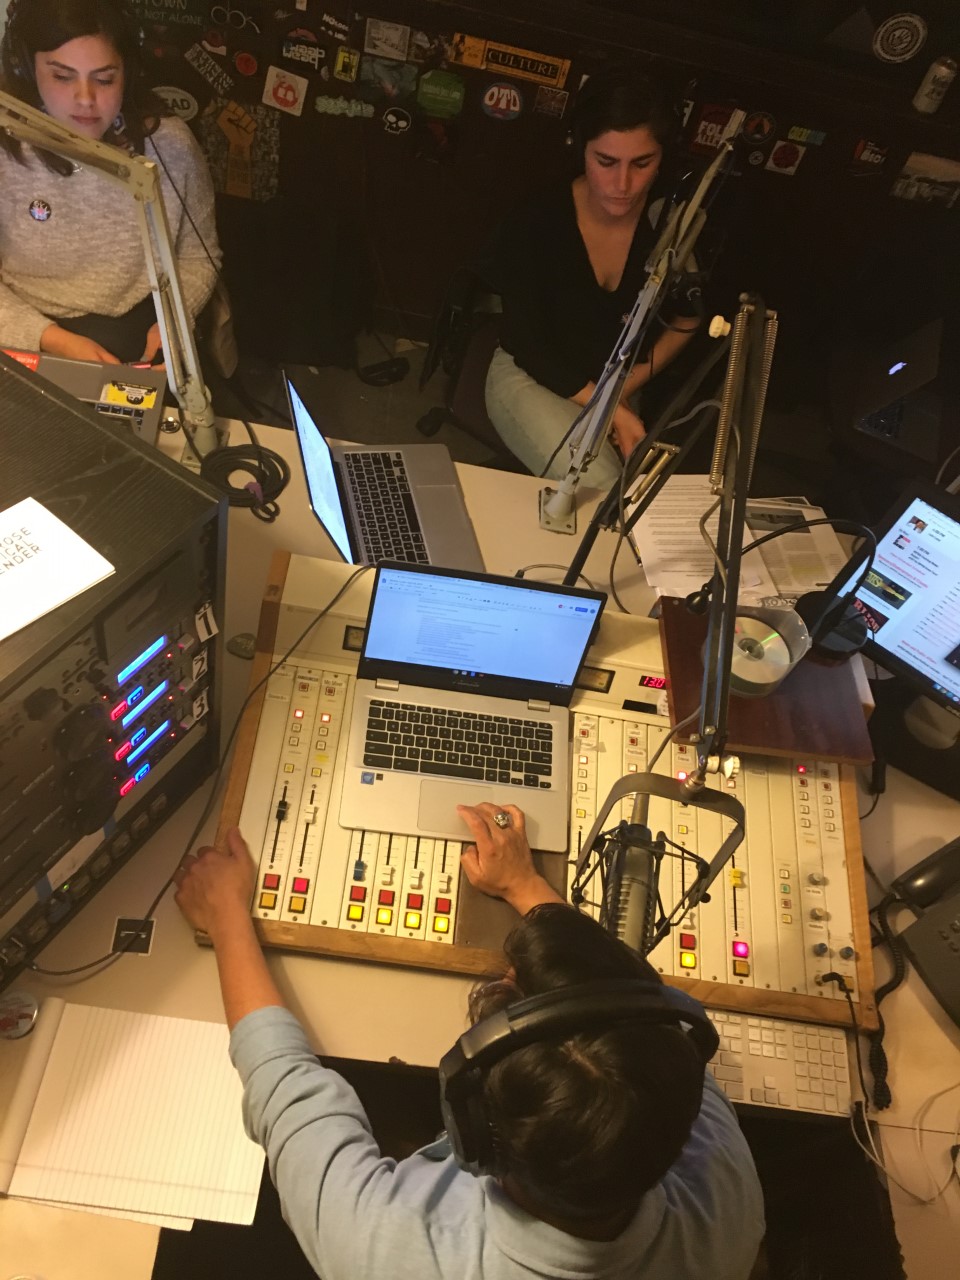 Luis and Sylvia are joined by migrant justice organizer Ana María Rivera-Forastieri
              for a live on-air conversation at the WPKN studio following the broadcast of the show.